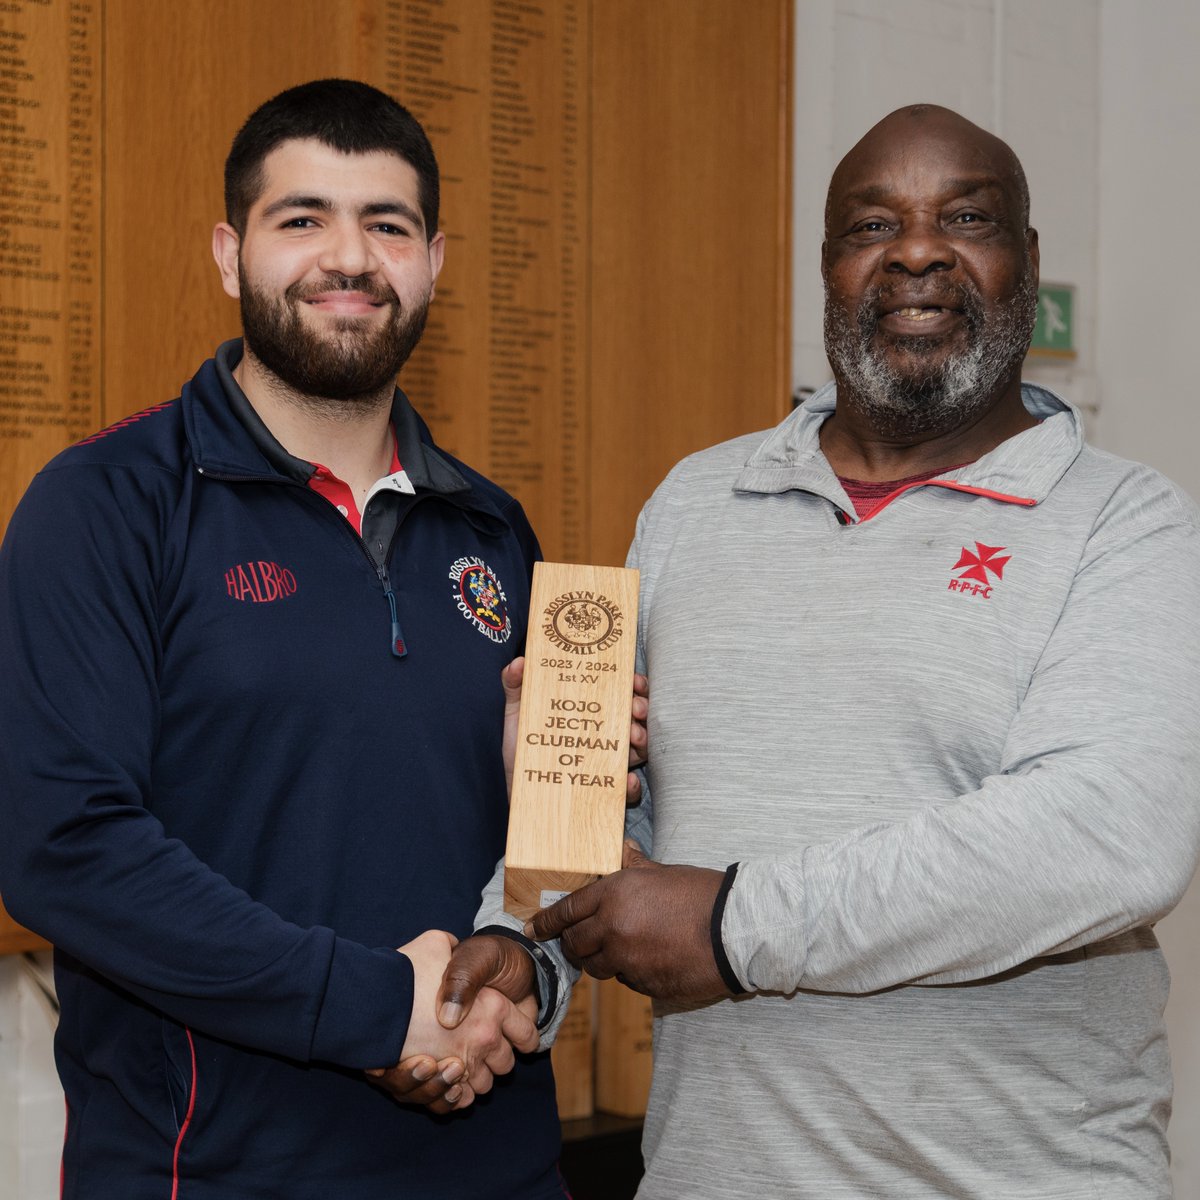 🏆 An award named after the ultimate clubman, congratulations to Diego Cost - the 2023/24 Kojo Jecty Clubman of the Year! #RPFC